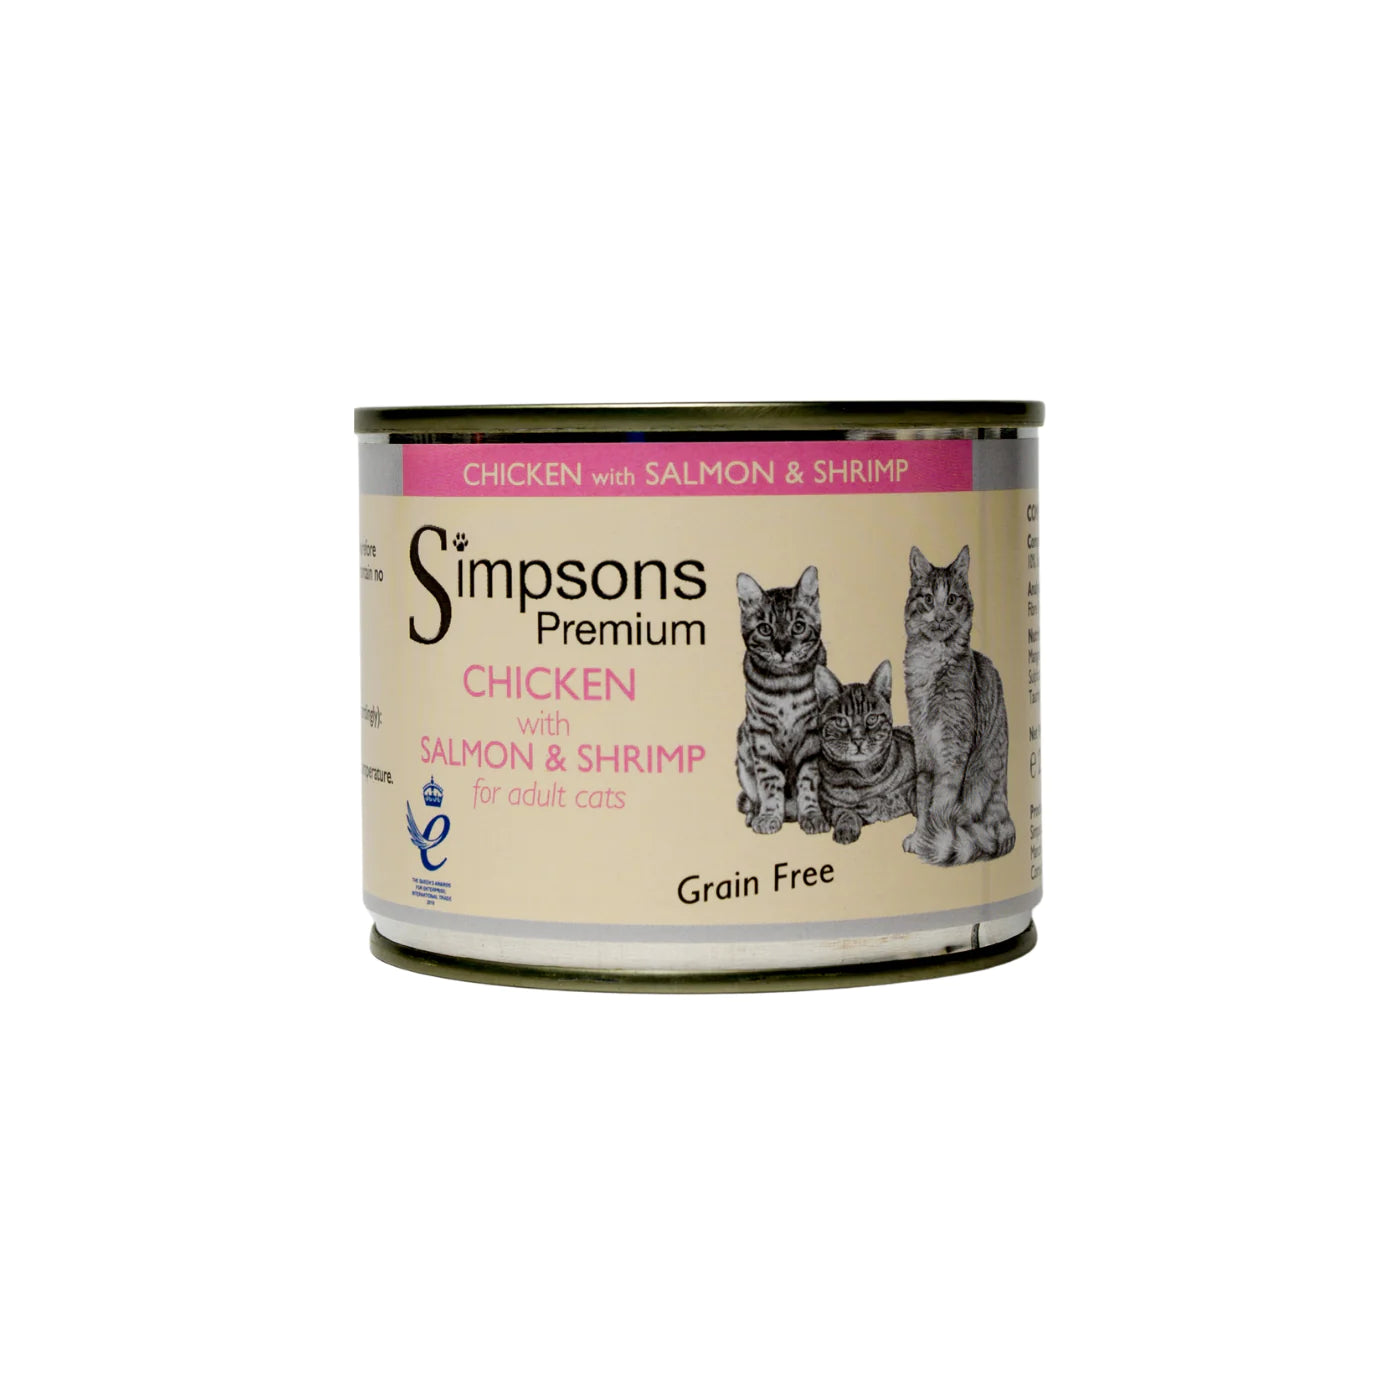 Simpsons Cat Food Chicken with Salmon & Shrimp